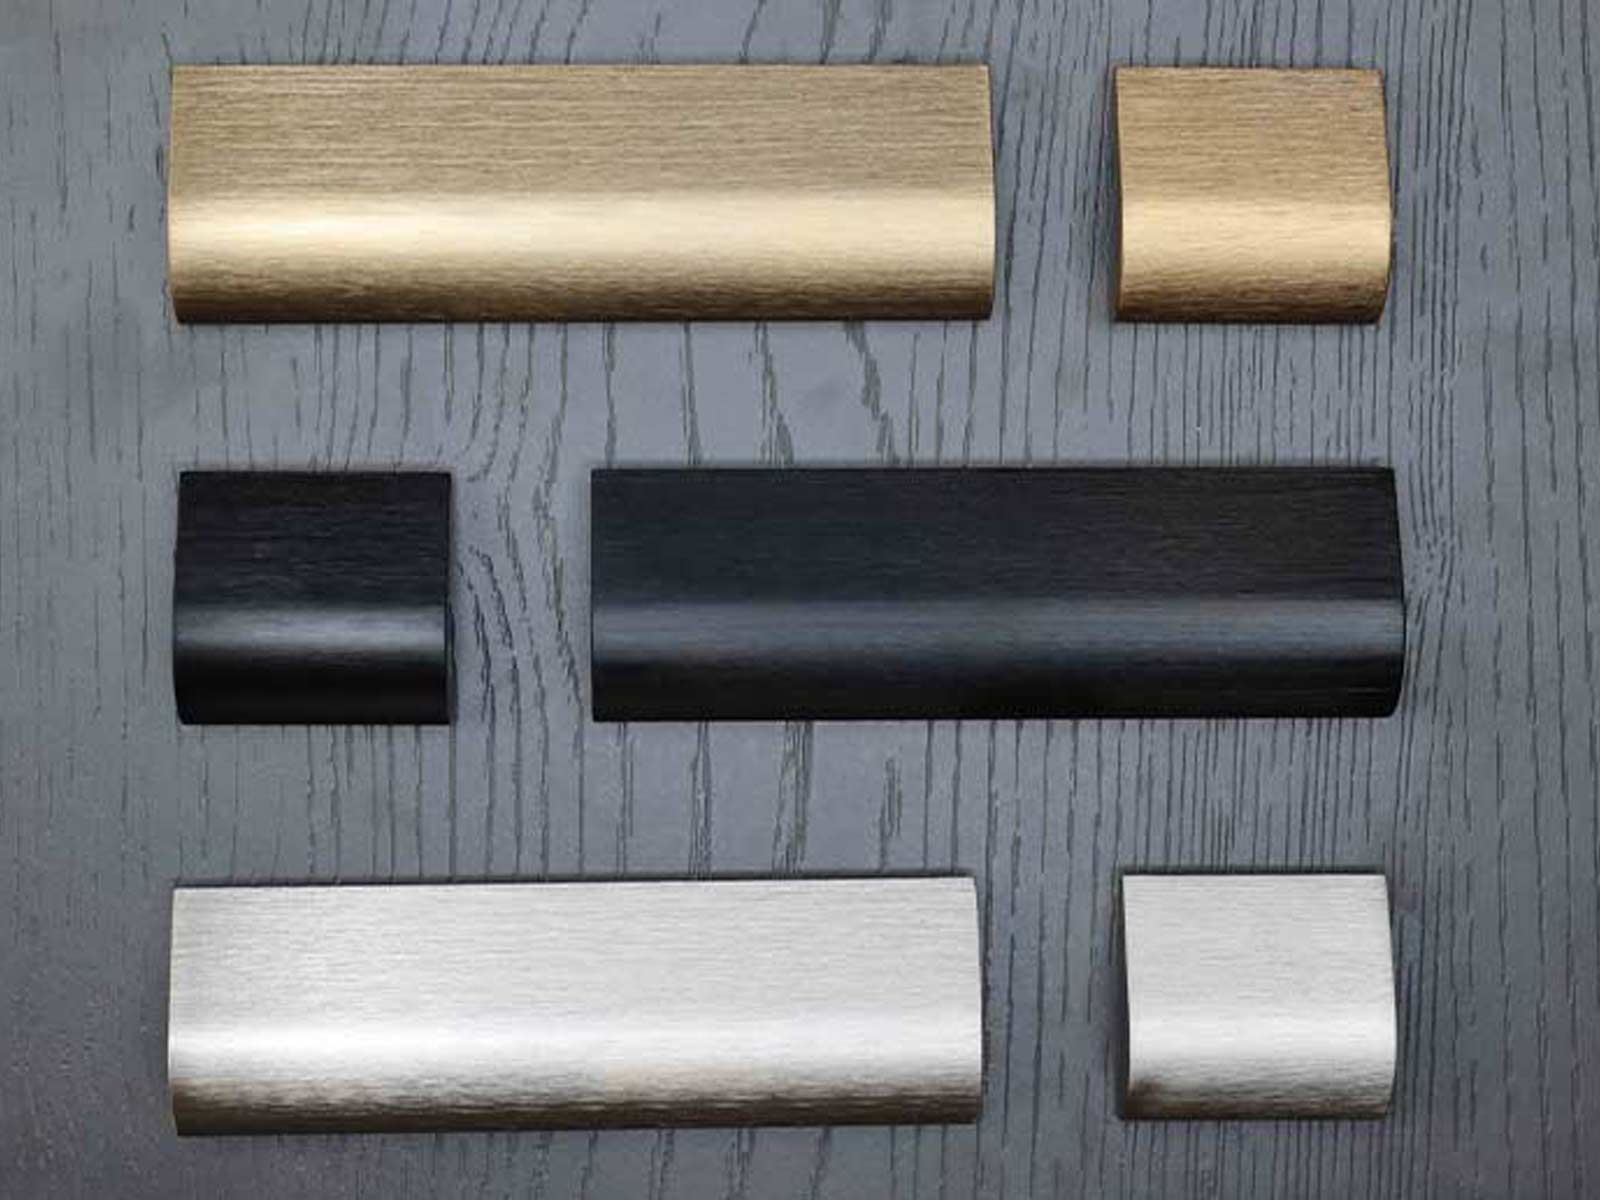 Modern kitchen cabinet handles in a brushed metallic finish